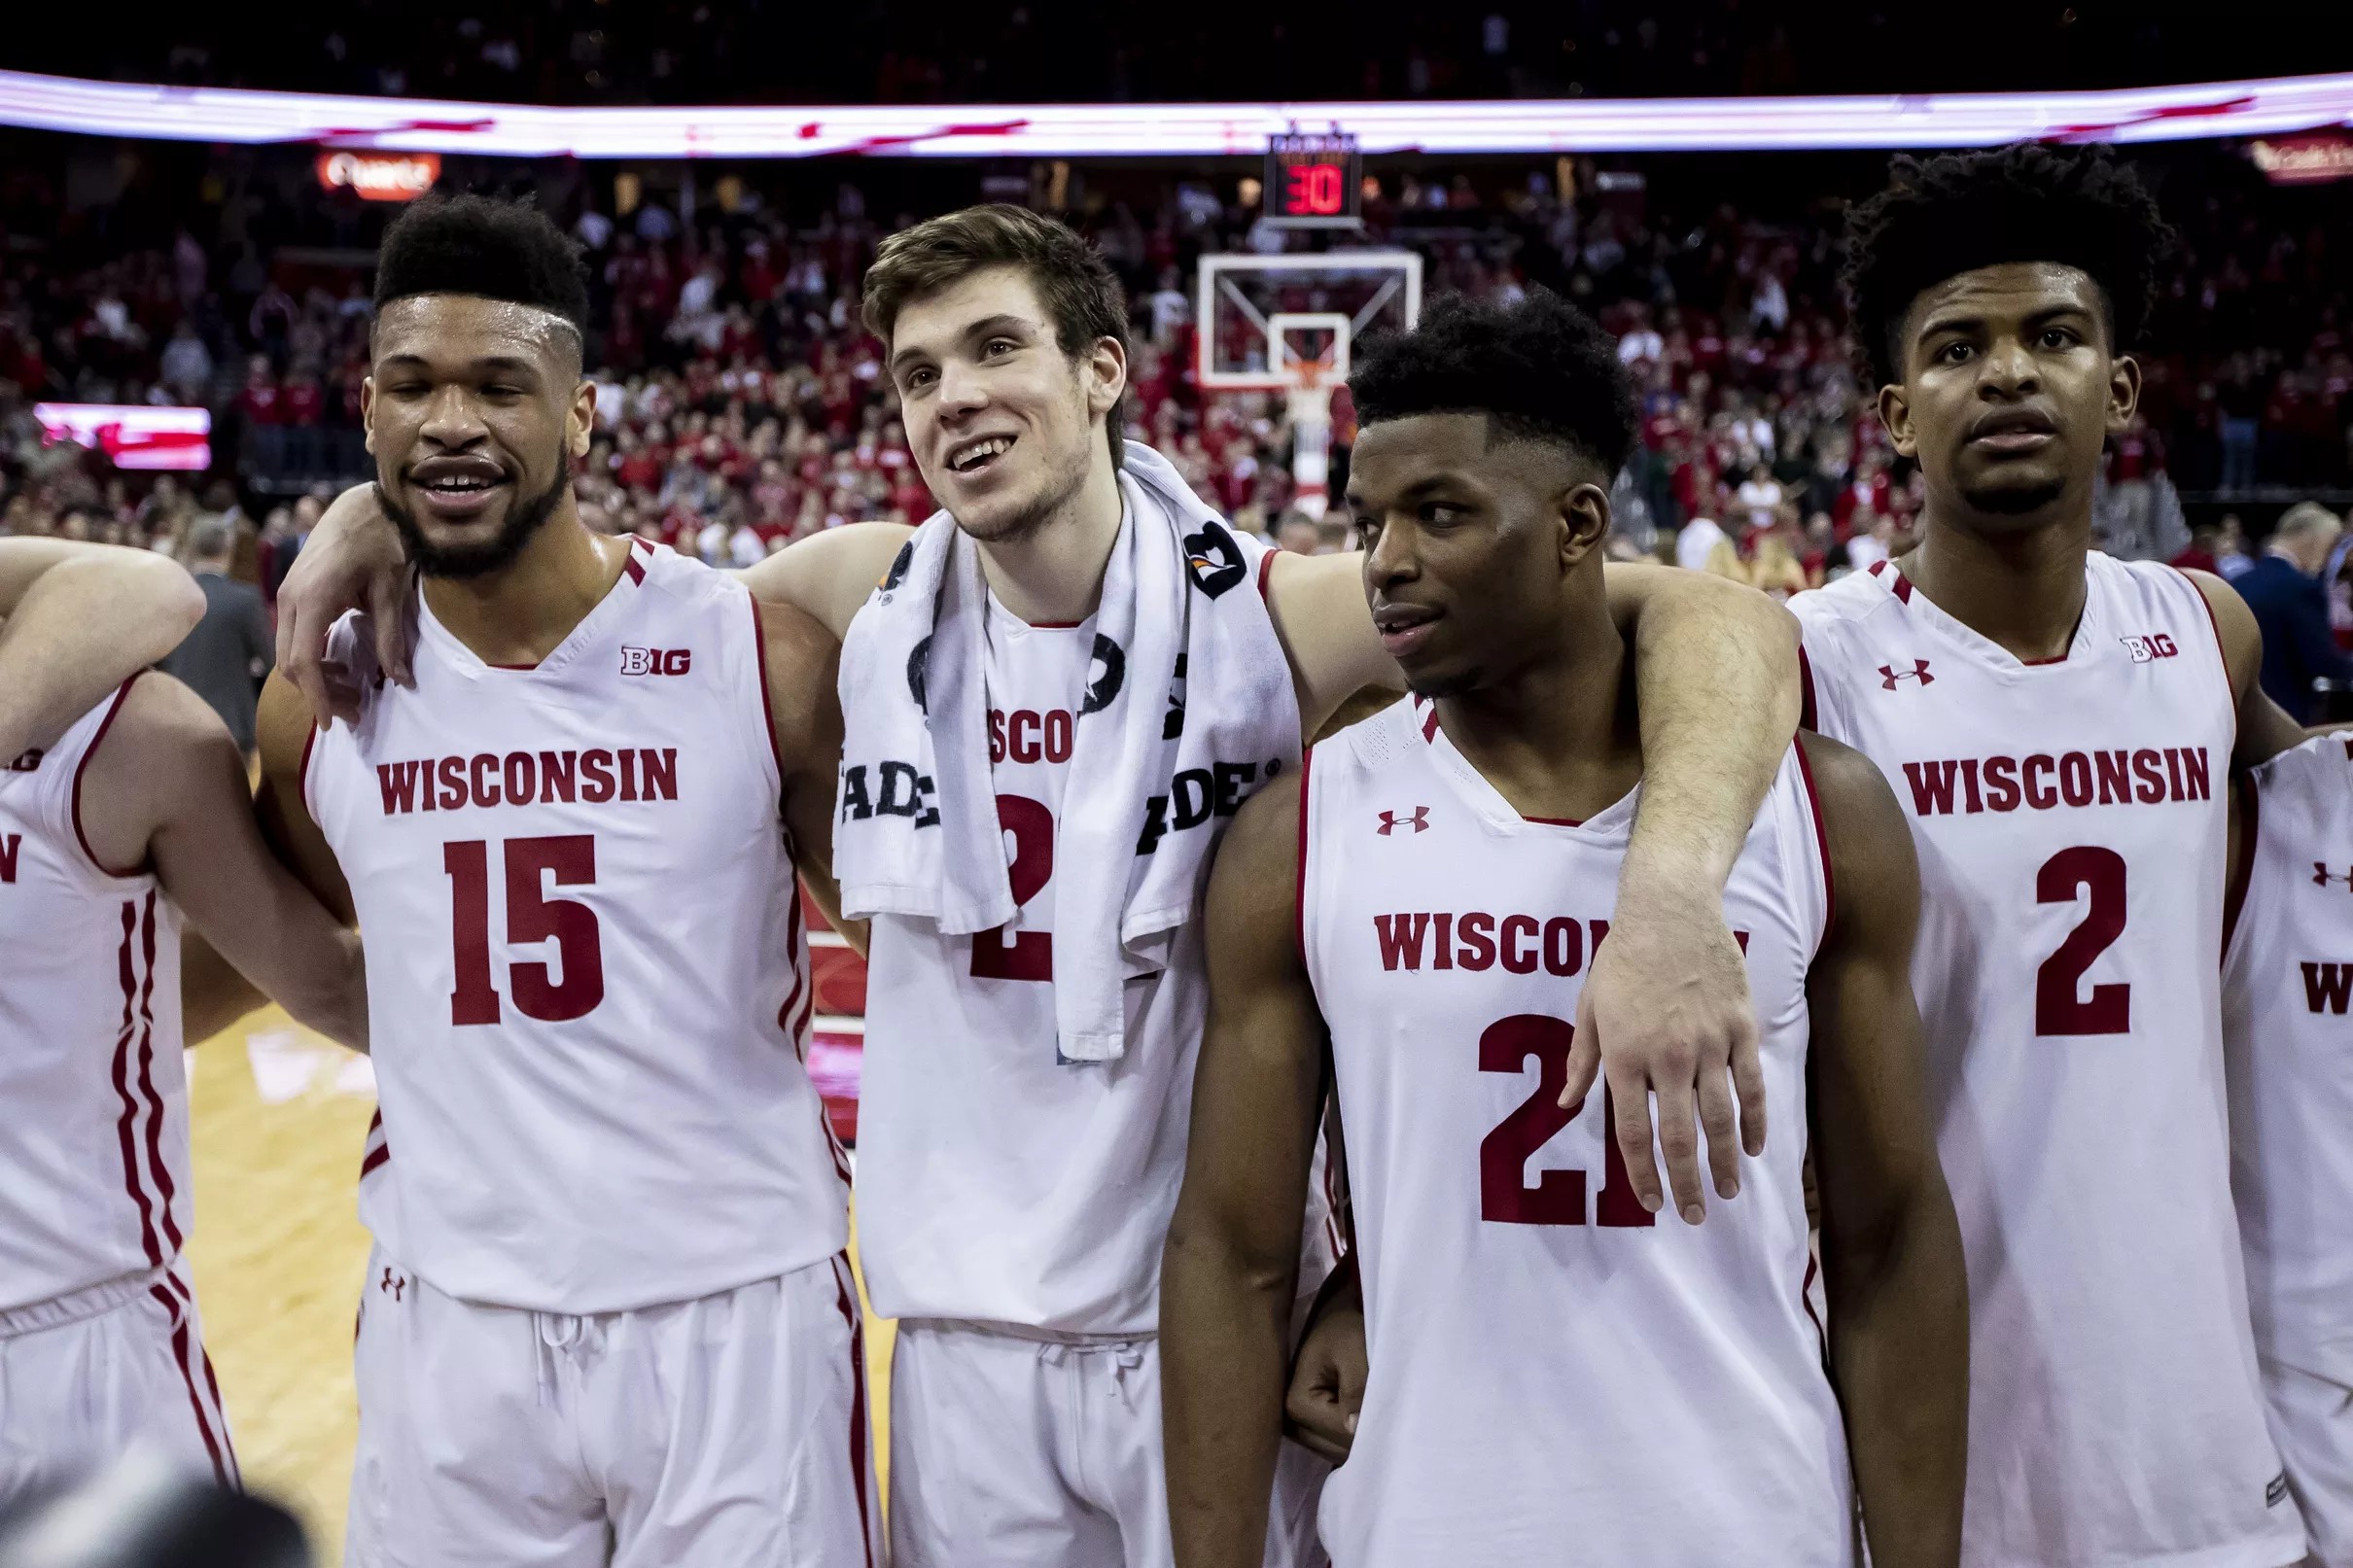 NCAA Tournament predictions for Wisconsin heading into Selection Sunday